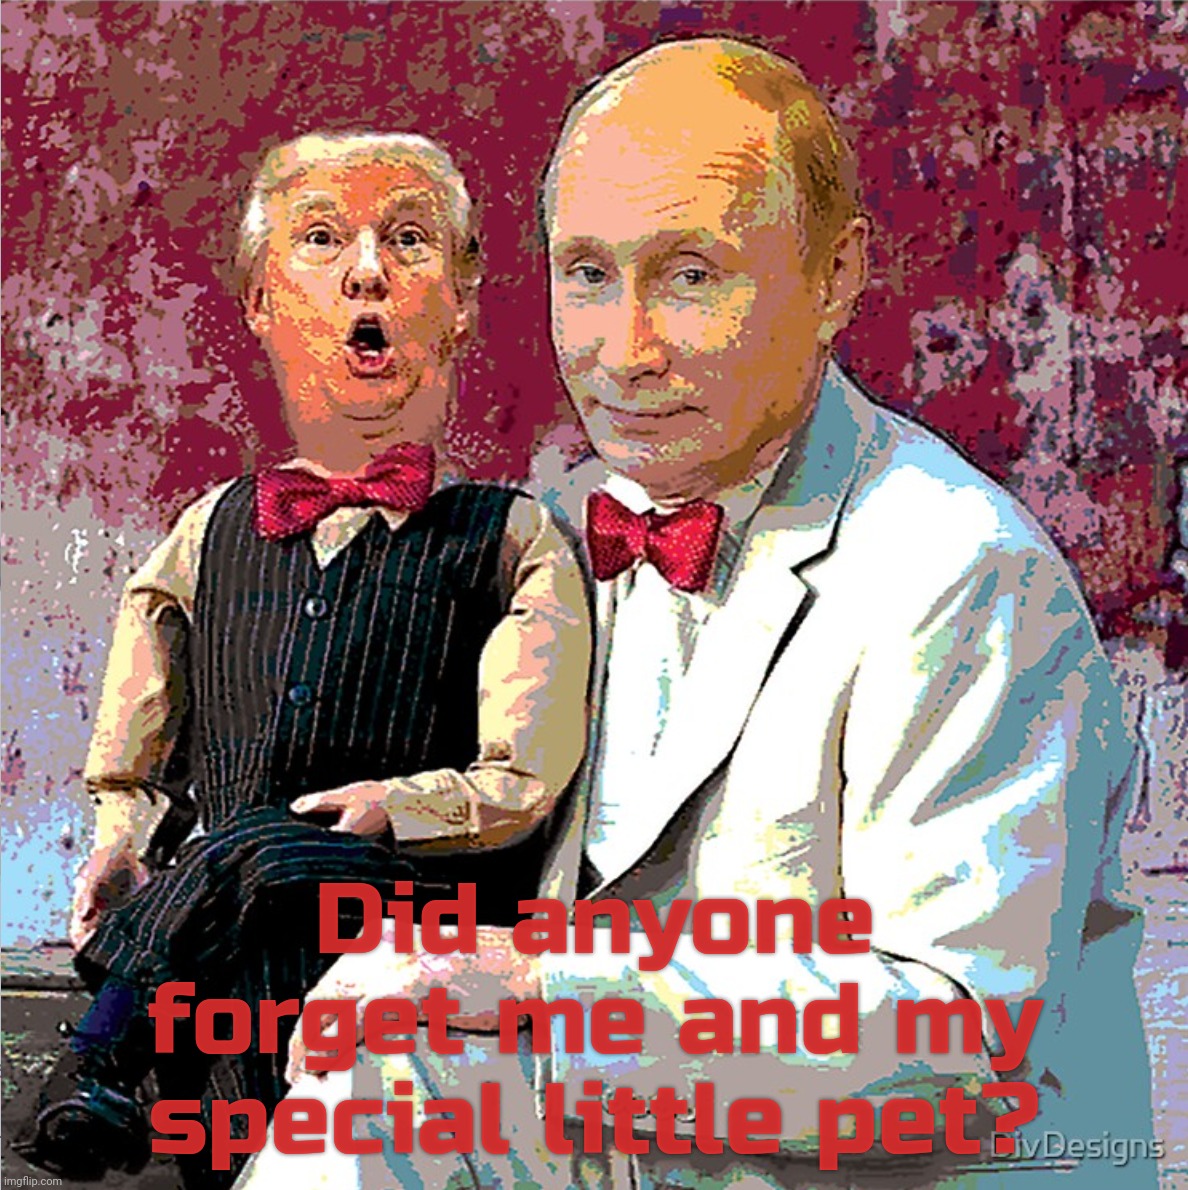 Trump Putin puppet | Did anyone forget me and my special little pet? | image tagged in trump putin puppet | made w/ Imgflip meme maker